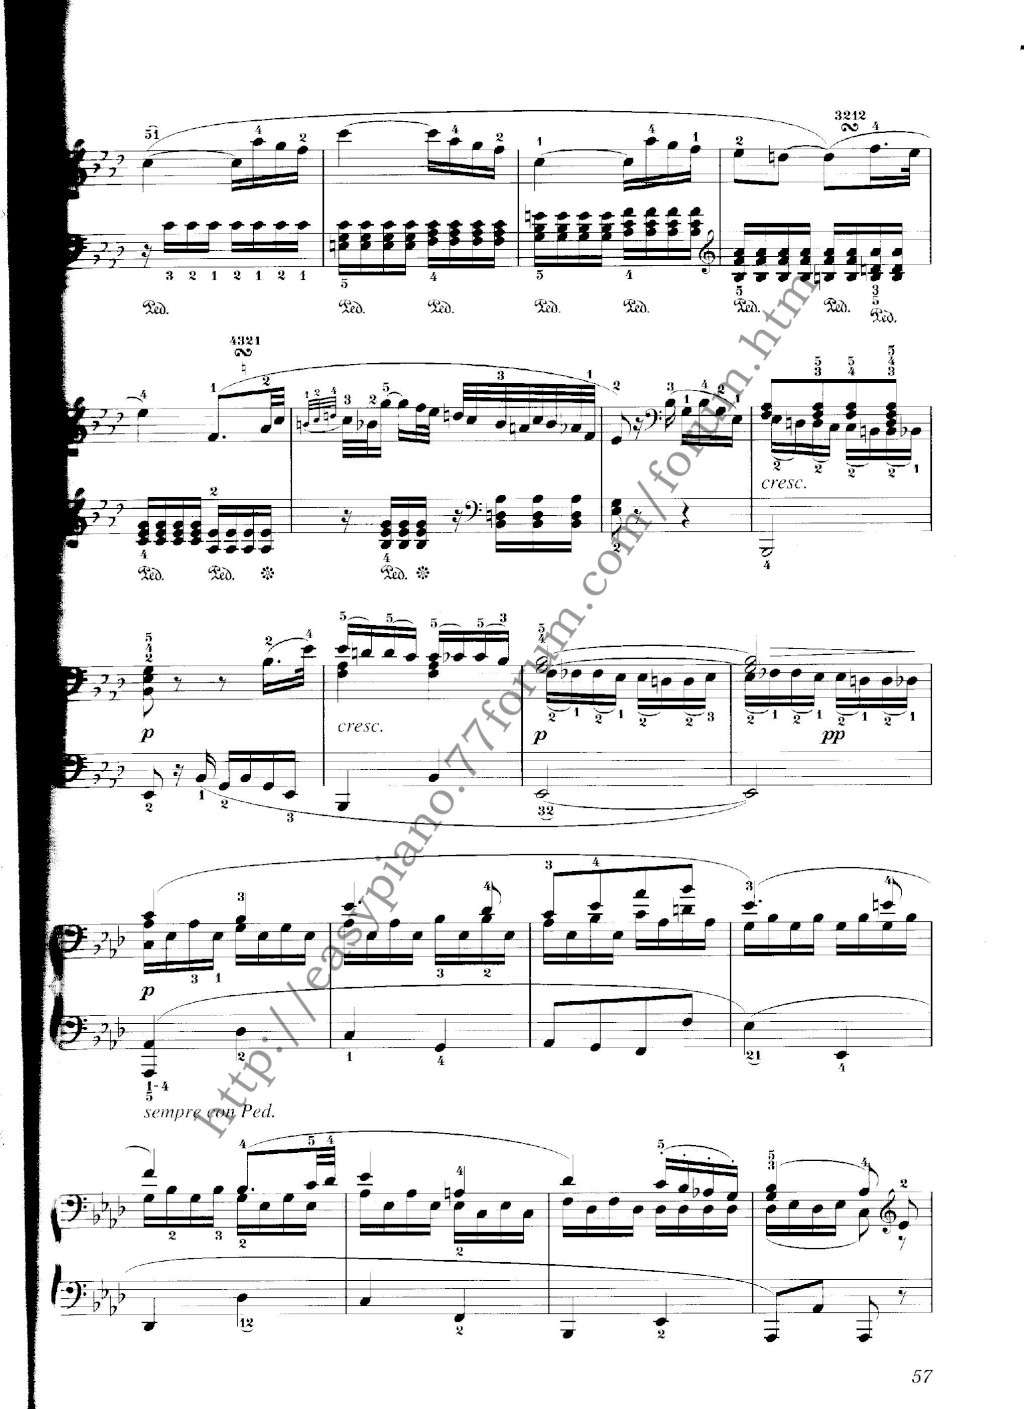 Piano sonate op.13 "pathetique" 2nd mov. - l.v.beethoven Piano_18